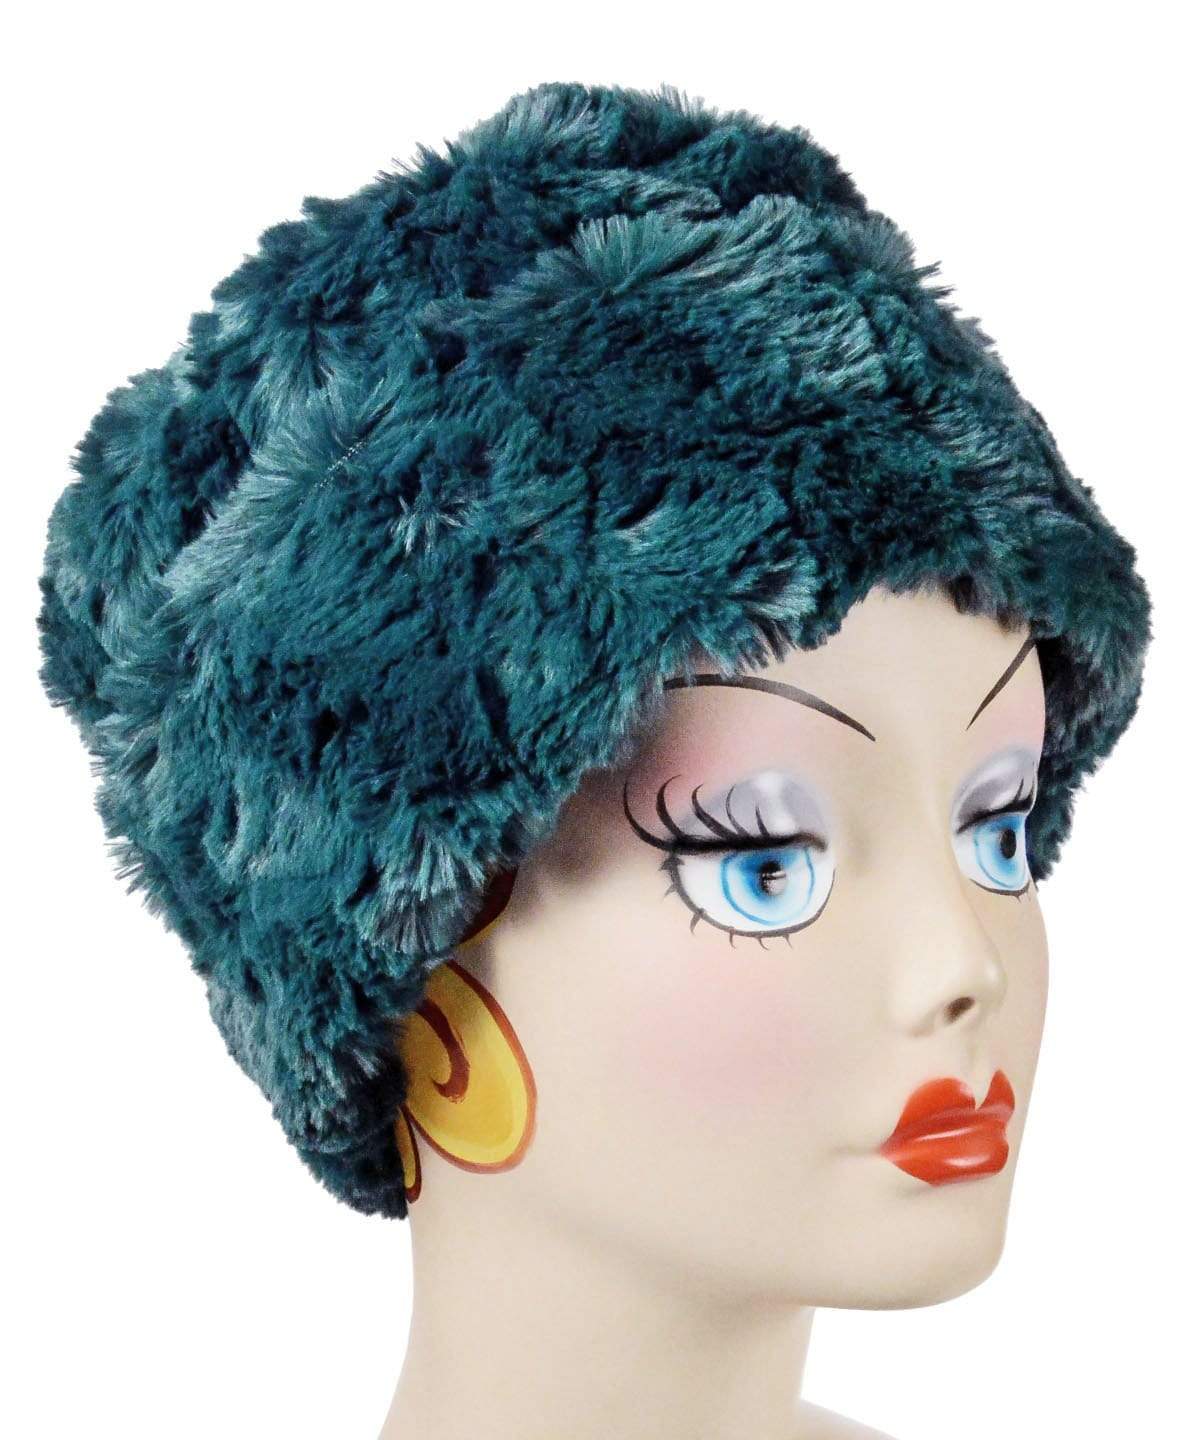  Right side view Cuffed Pillbox Reversible shown in Peacock Pond Faux Fur by Pandemonium Millinery. Handmade in Seattle, WA USA.